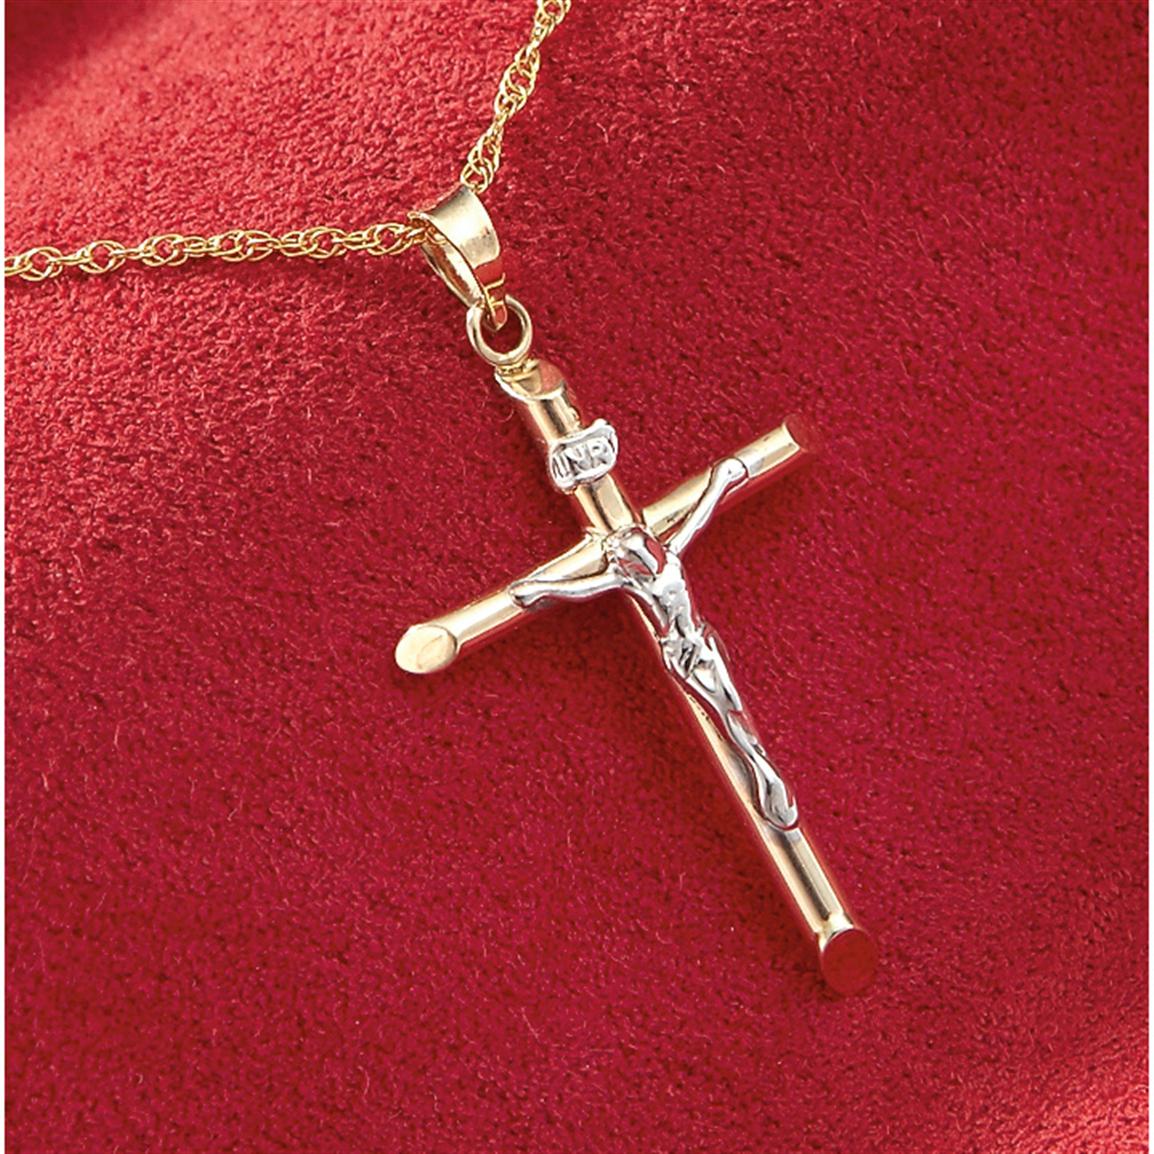 10k Gold Crucifix Necklace - 211906, Jewelry at Sportsman ...